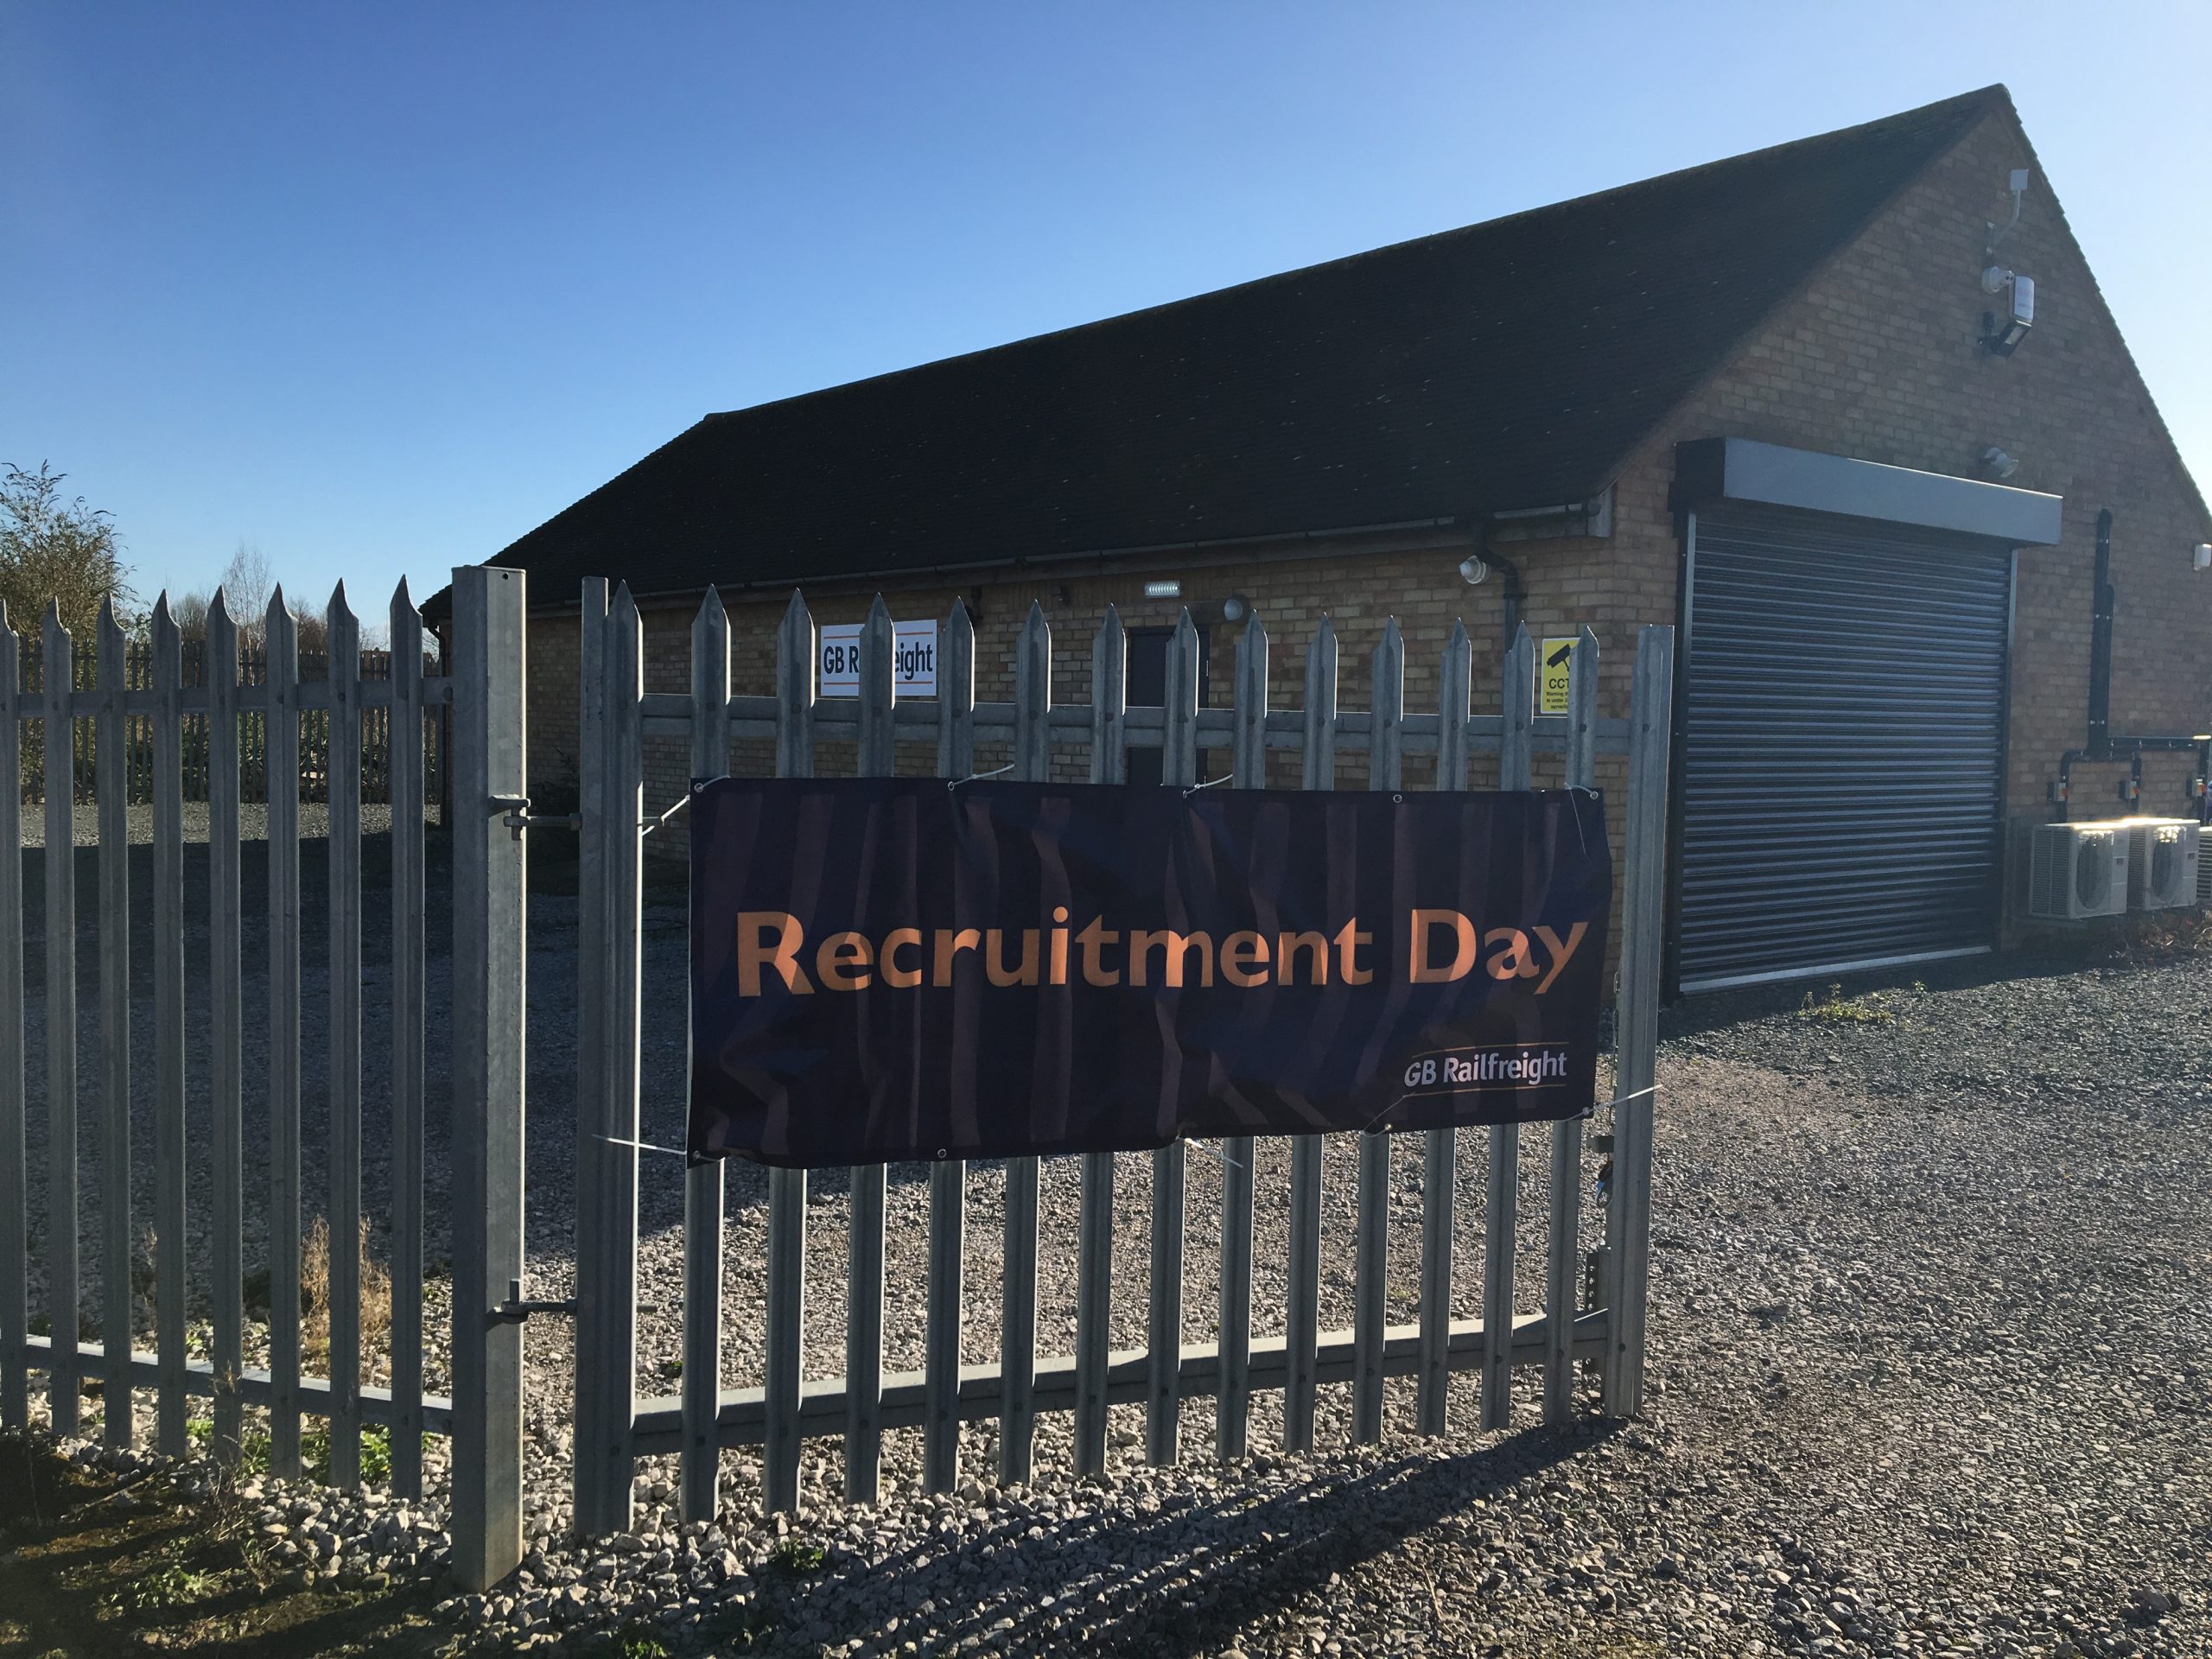 GB Railfreight Holds Recruitment Day for Military Service Leavers in Peterborough